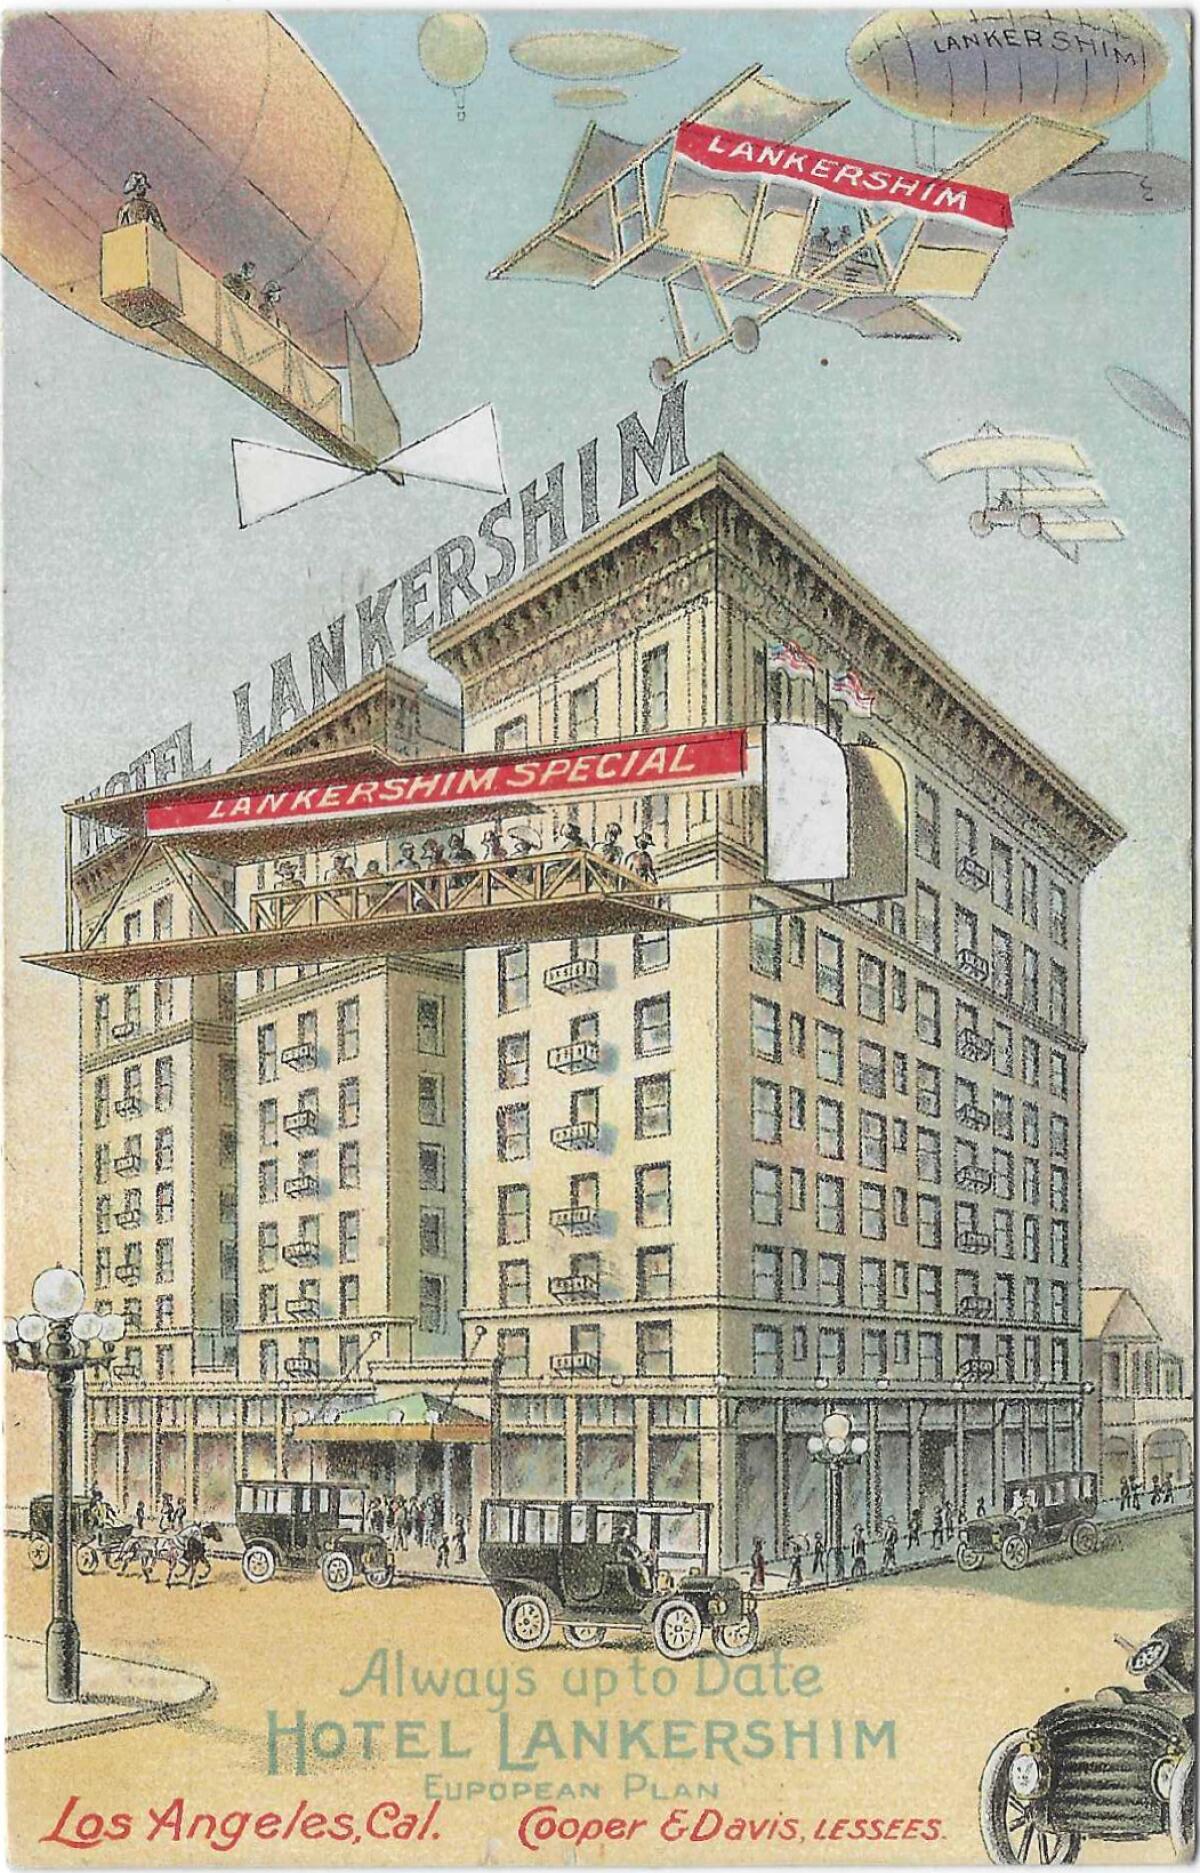 Postcard shows Hotel Lankershim with a blimp and airplanes above. Text: "Always up to date."